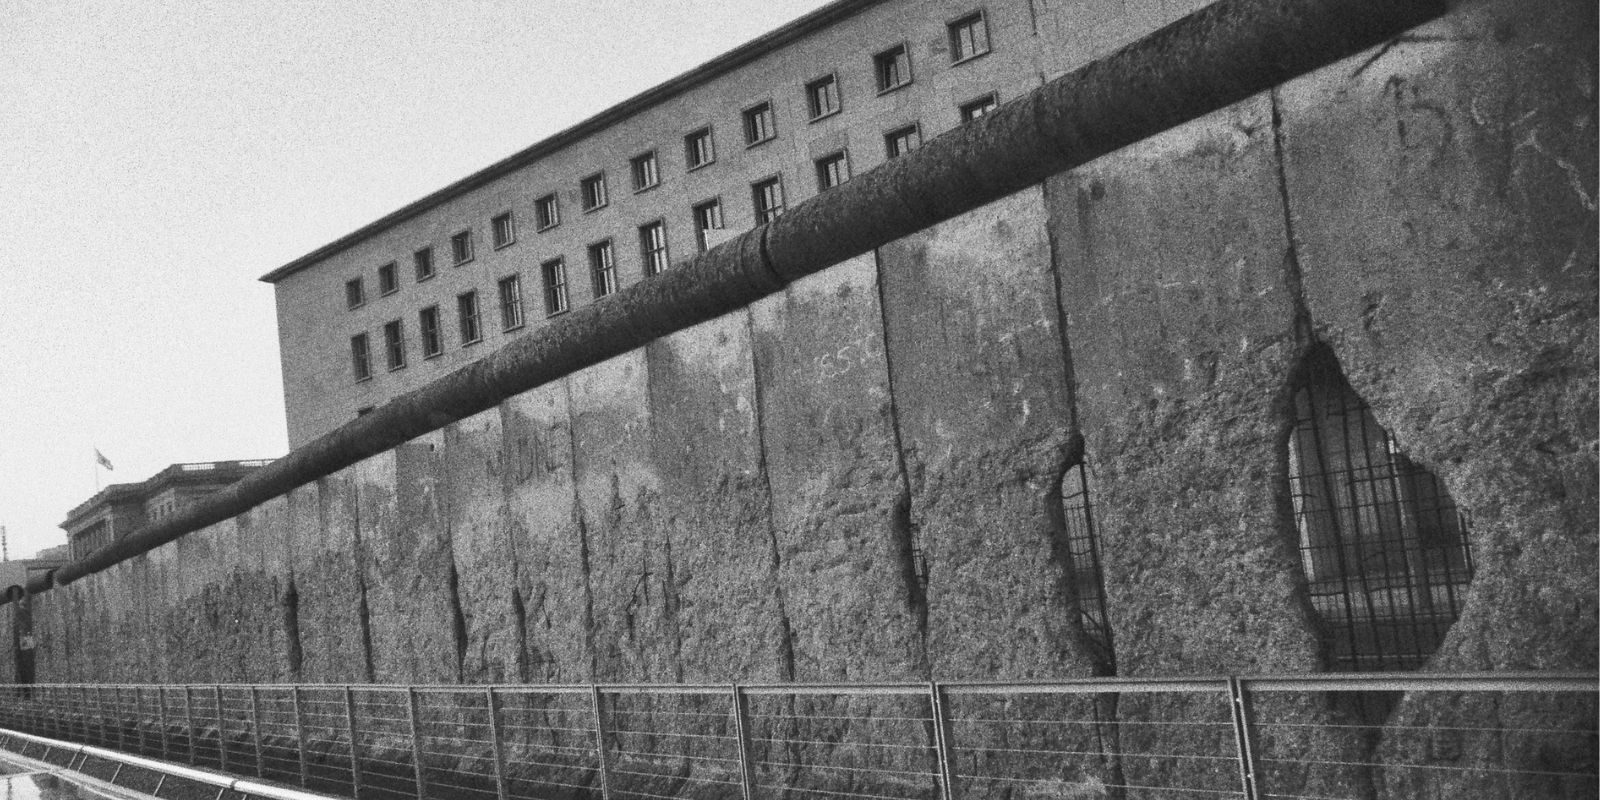 November 9th: The World Witnessed The Fall Of The Berlin Wall